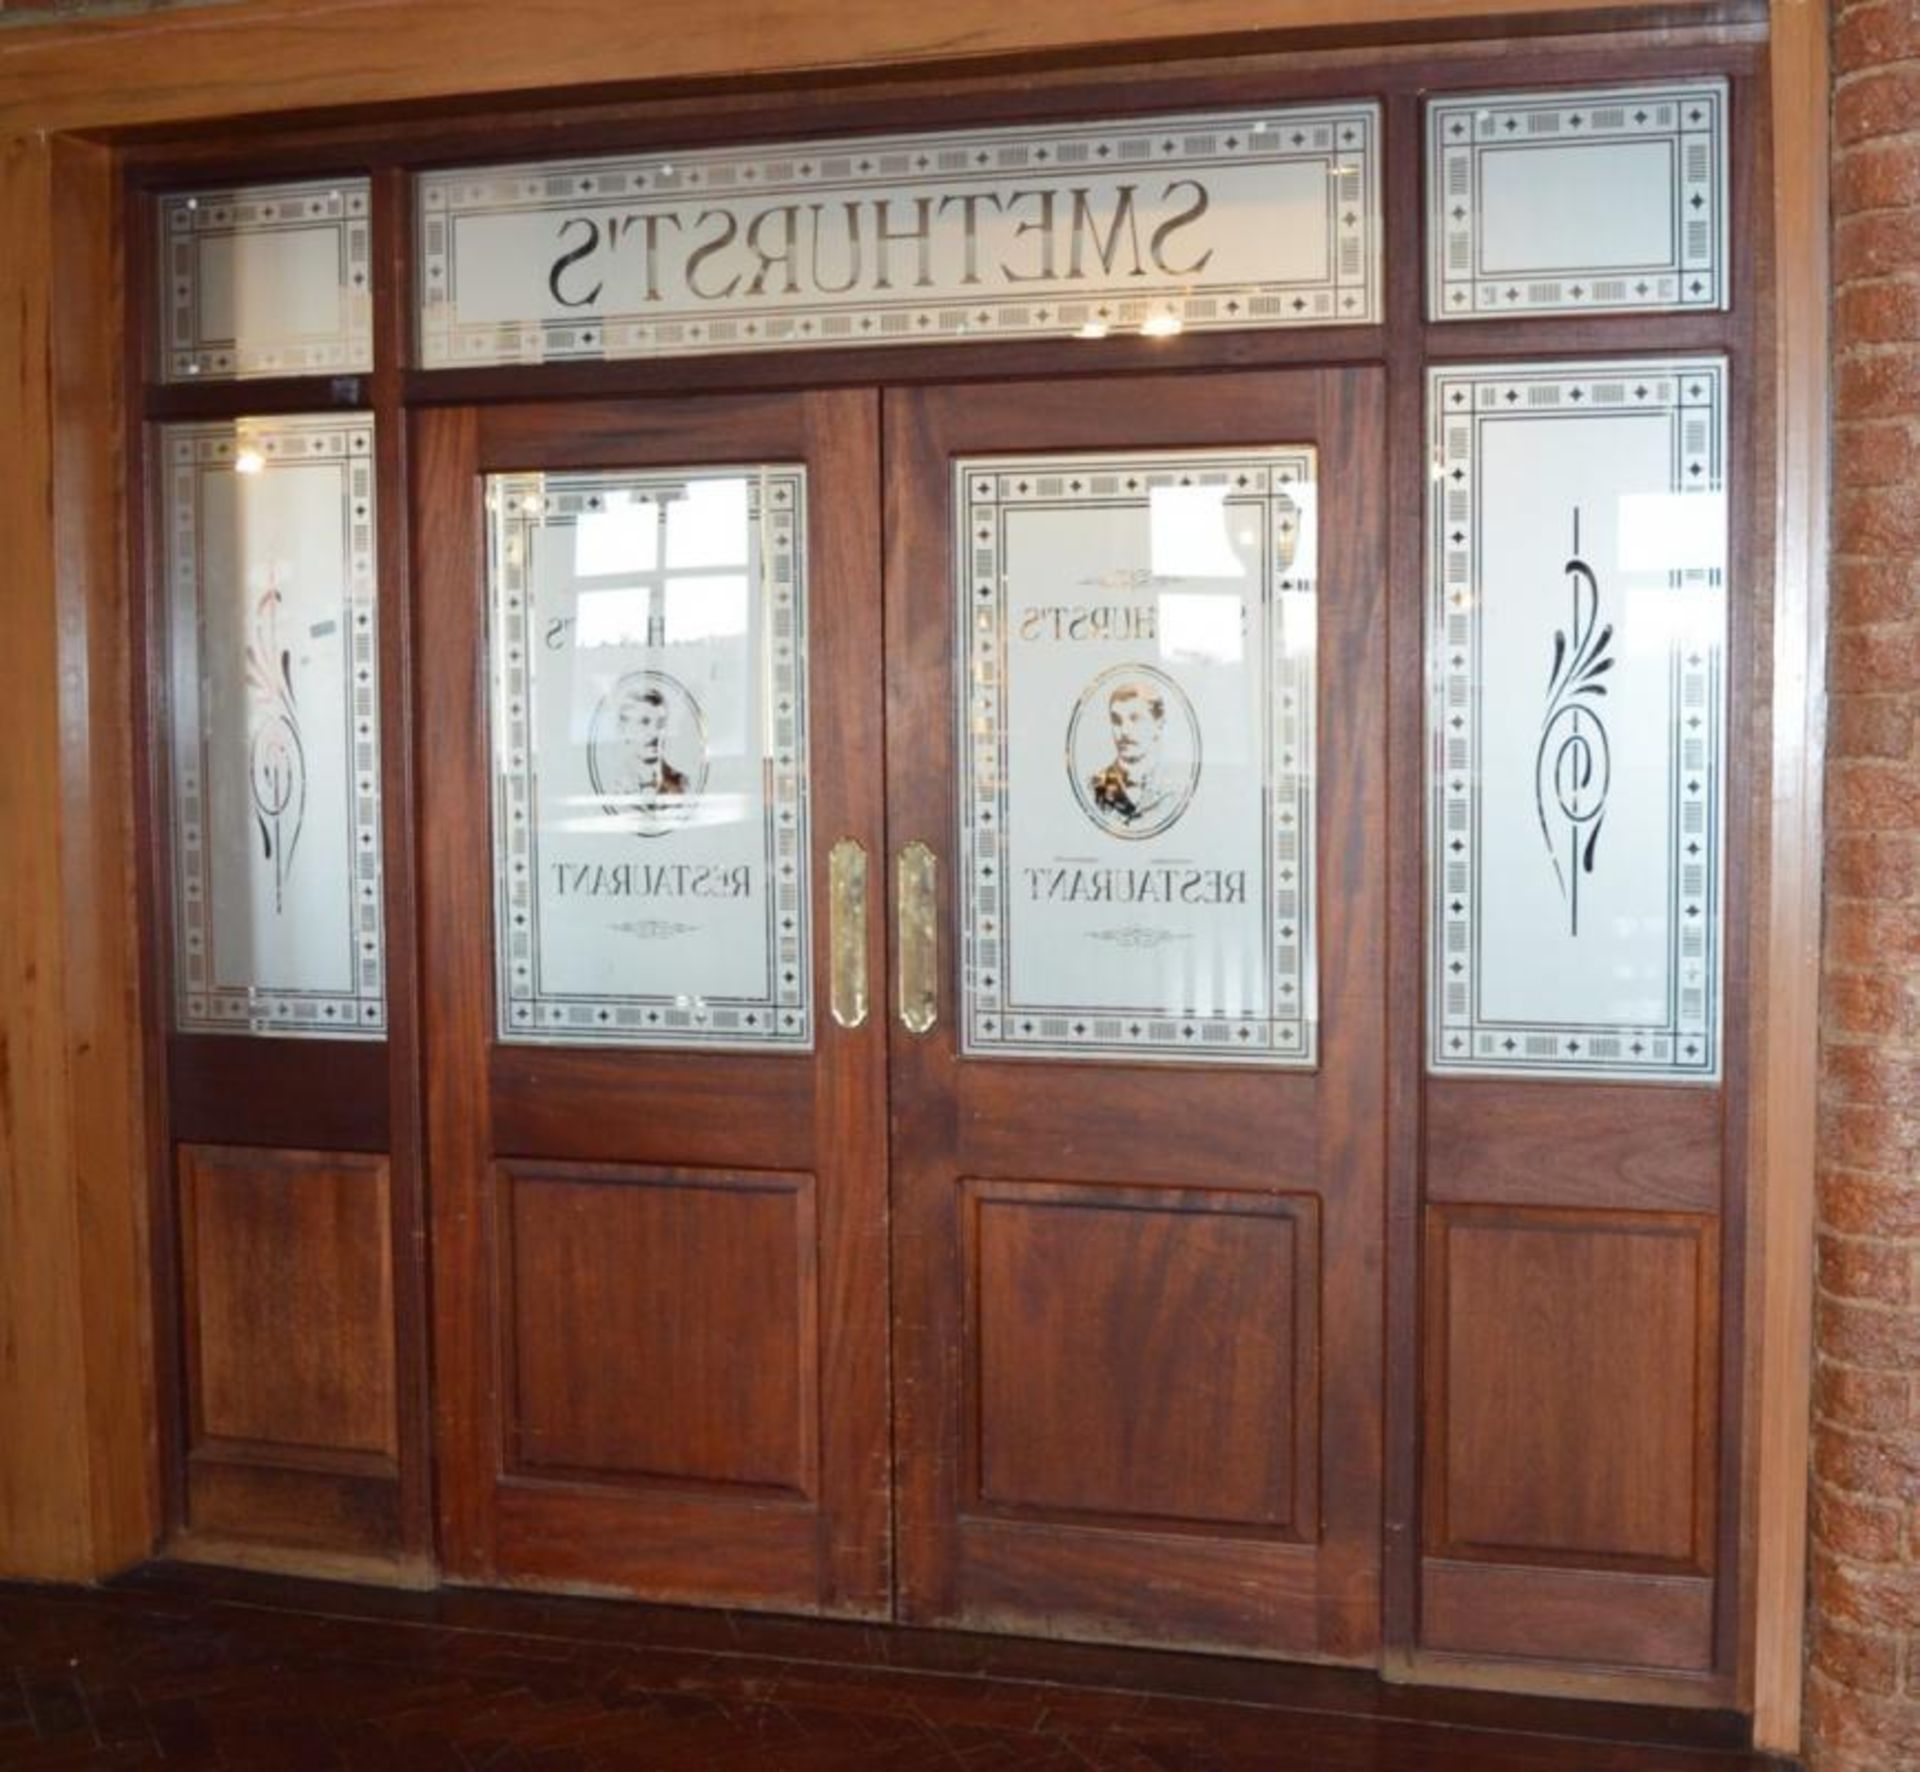 1 x Set of Double Doors With Surround - Smithhursts Restaurant and Bar - Includes Brass Hardware - H - Image 2 of 7